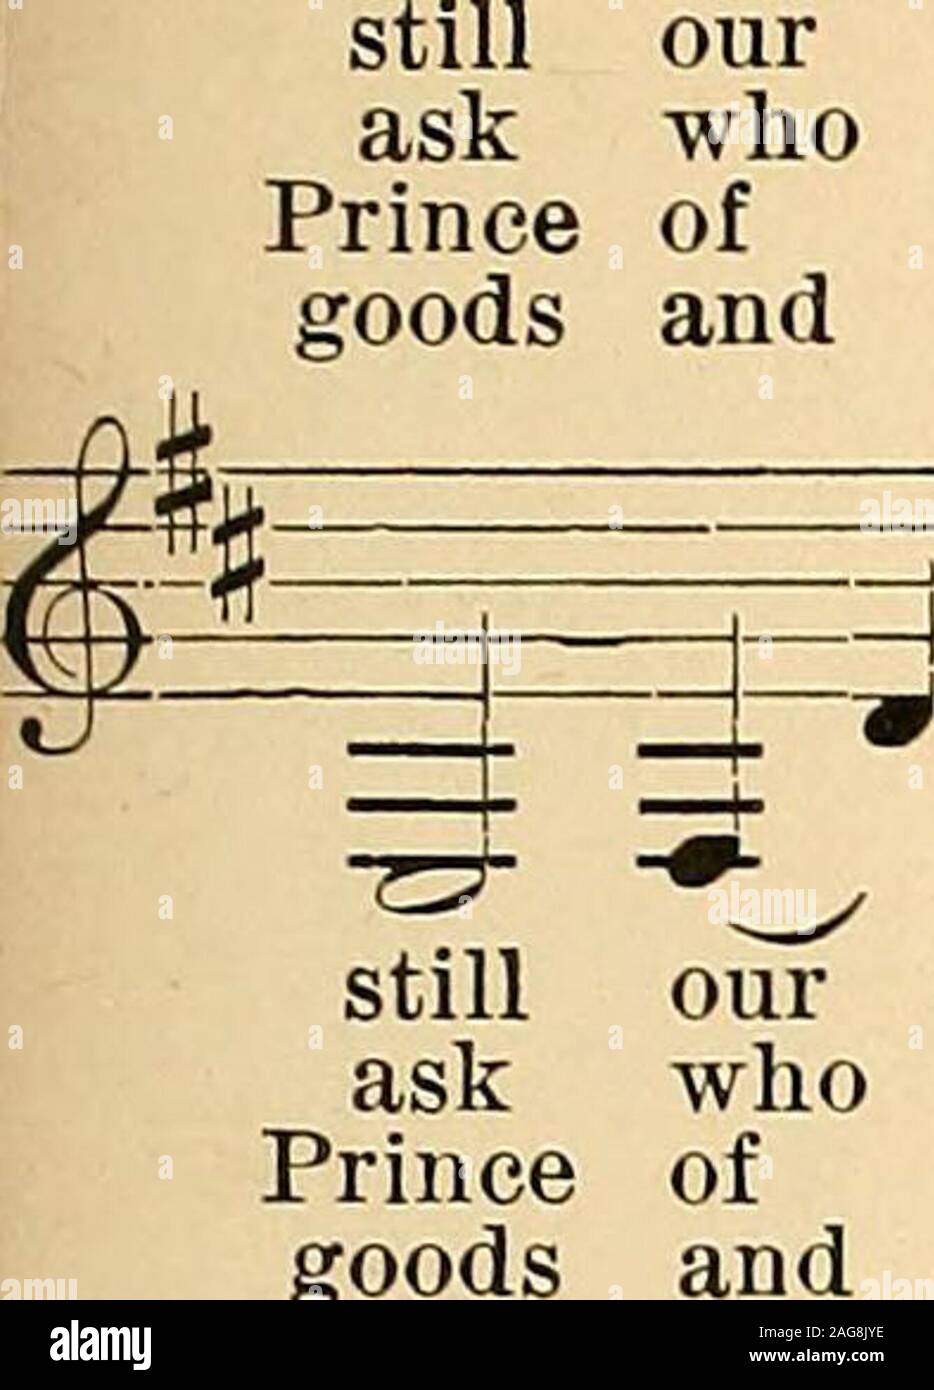 . Patriotic songs : for school and home. our an - cient foe Doth seek to work who that may be?Christ Je - sus, it of Dark - ness grim, We trem - hie not and kin - dred go, This mor - tal life us woe, Hisis He, Lordfor him, Hisal - so; The f7 craft and power are Sa - ba - oth His rage we can en - bod - y they may 3=3: BE=± -*—j.-^ - still ask Prince goods an - cient foe Doth seekthat may be? Christ Je -Dark-ness grim, We trem-kin- dred go, This mor • to work sus, it ble not tal life -rzr us woe, Hisis He, Lordfor him, Hisal - so; The ^ craftSa -ragebod and power are ba - oth His we can en y th Stock Photo